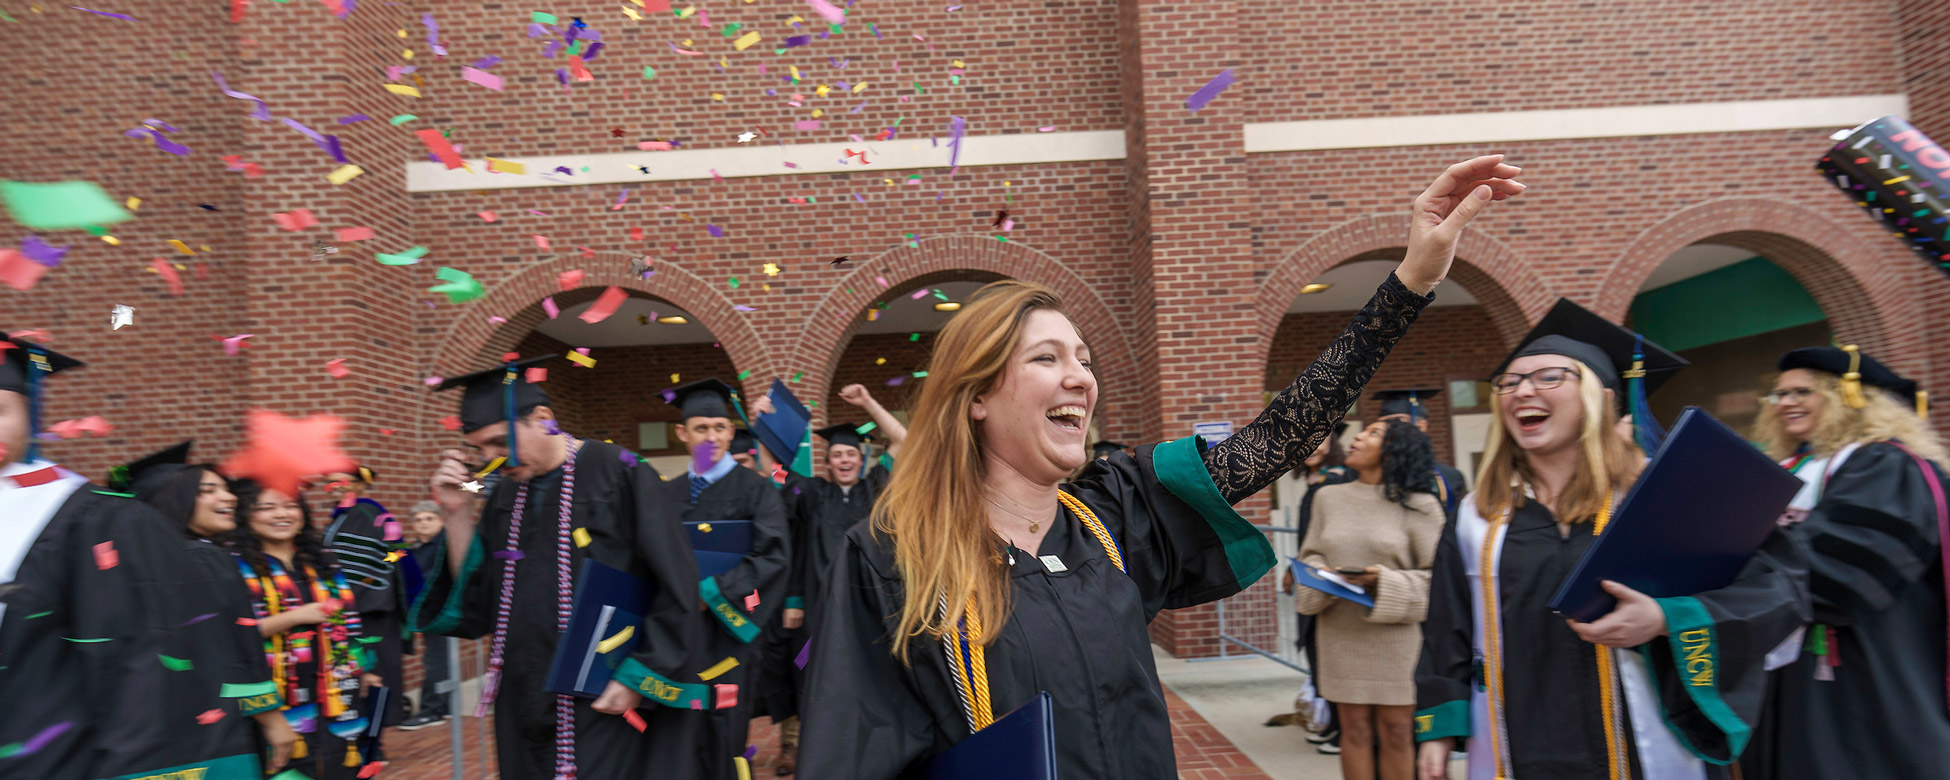 Students celebrate commencement with confetti